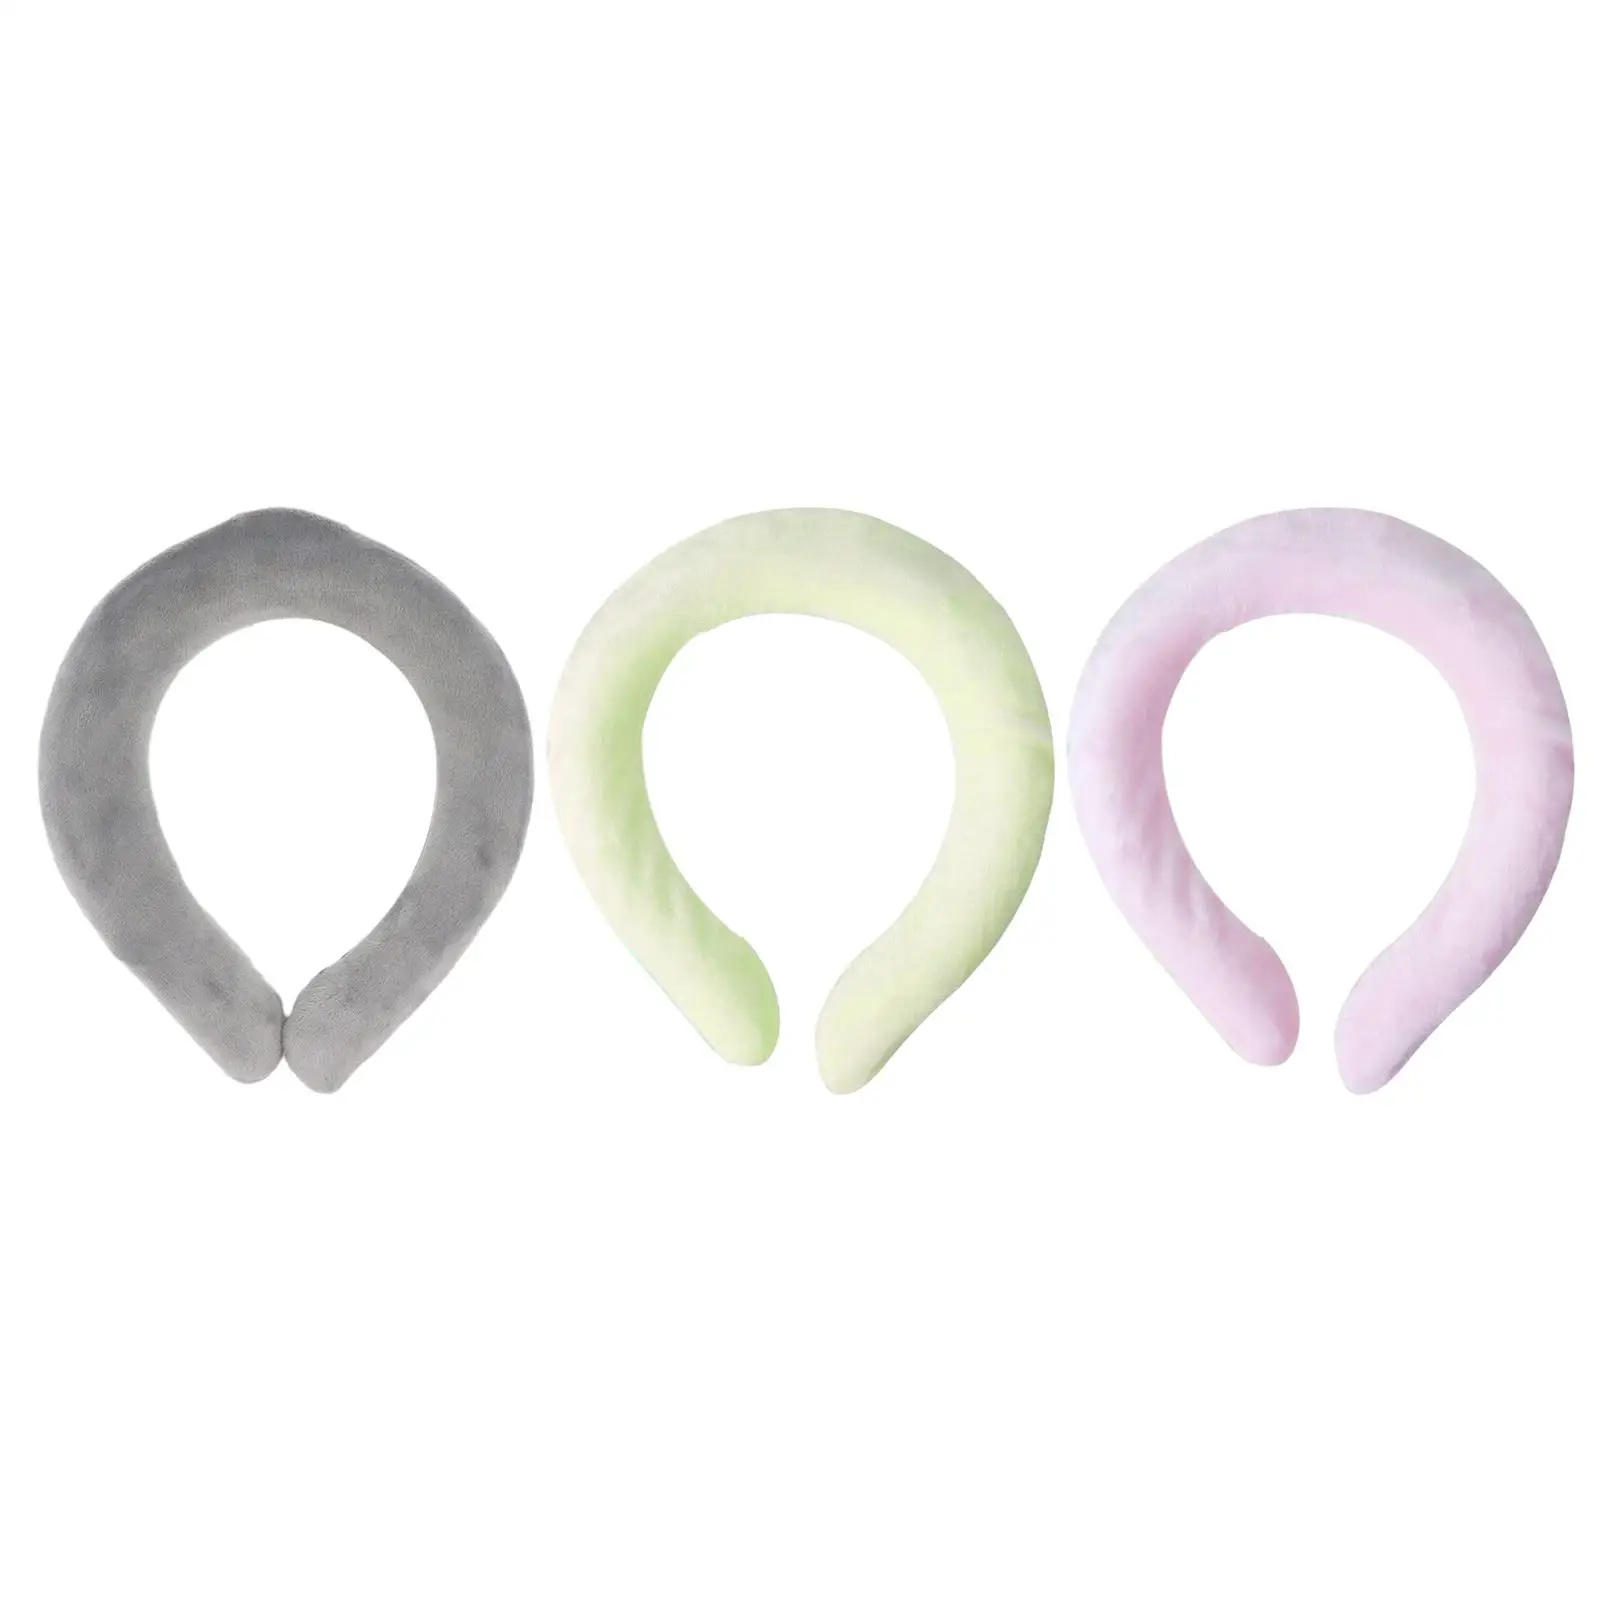 Neck Heat Ring Wearable Hot Pack Hands Free Portable Neck Wrap for Winter Microwavable Reusable Neck Warm Ring Neck Warmer